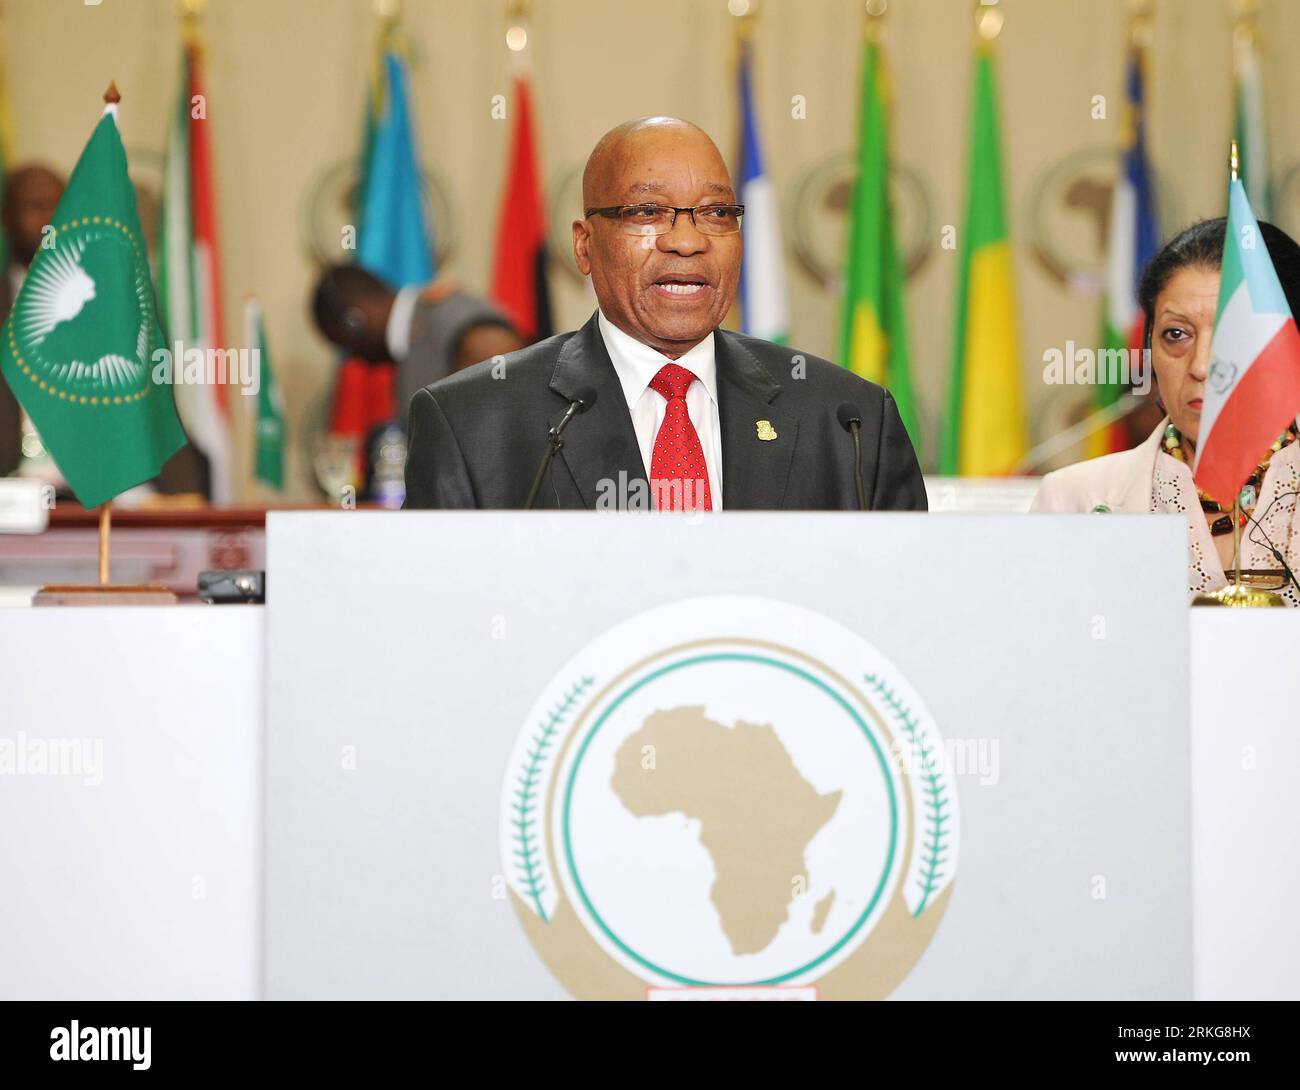 Bildnummer: 55565322  Datum: 01.07.2011  Copyright: imago/Xinhua (110702) -- MALABO, July 2, 2011 (Xinhua) -- South African President Jacob Zuma addresses a news conference in Malabo, capital of Ecuatorial Guinea, on July 1, 2011. The Libyan government and the rebels in the eastern part of the North African country will soon hold transitional negotiations in the Ethiopian capital Addis Ababa, Jacob Zuma said here at the end of the 17th AU Summit. (Xinhua/Ding Haitao) (yt) EQUATORIAL GUINEA-MALABO-AU SUMMIT-LIBYA PUBLICATIONxNOTxINxCHN People Politik xda x0x premiumd 2011 quer     Bildnummer 55 Stock Photo